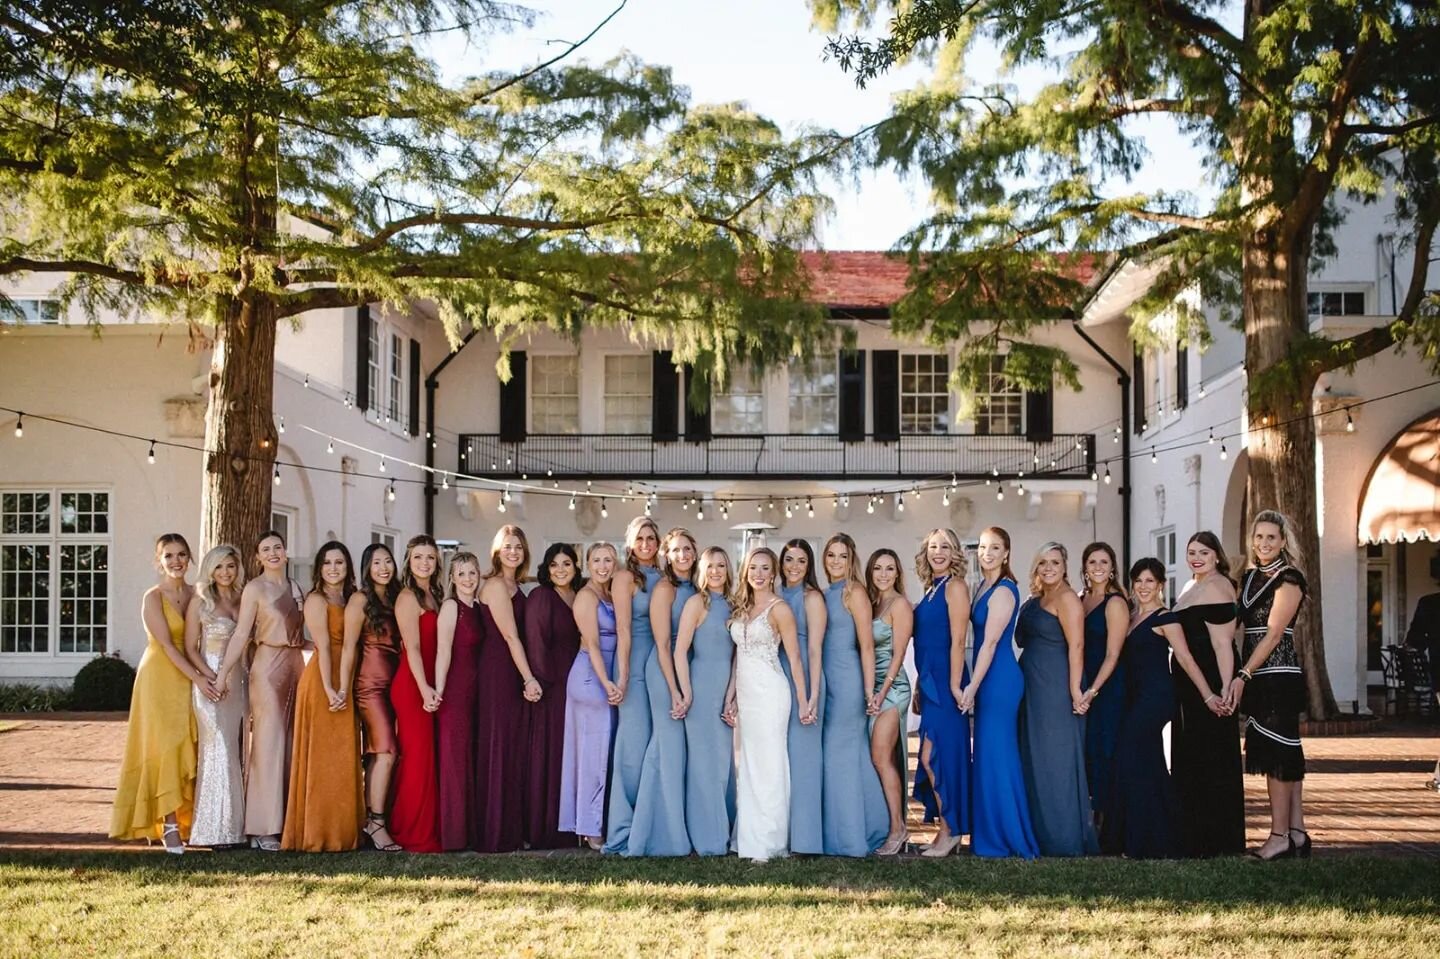 &quot;Every woman's success should be an inspiration to another. We're strongest when we cheer each other on. - Serena Williams
@catherinestupp
#thesquad #bridesquad #friendsforever #internationalwomensday #stlmade #stlove #stlweddingphotographer #sa